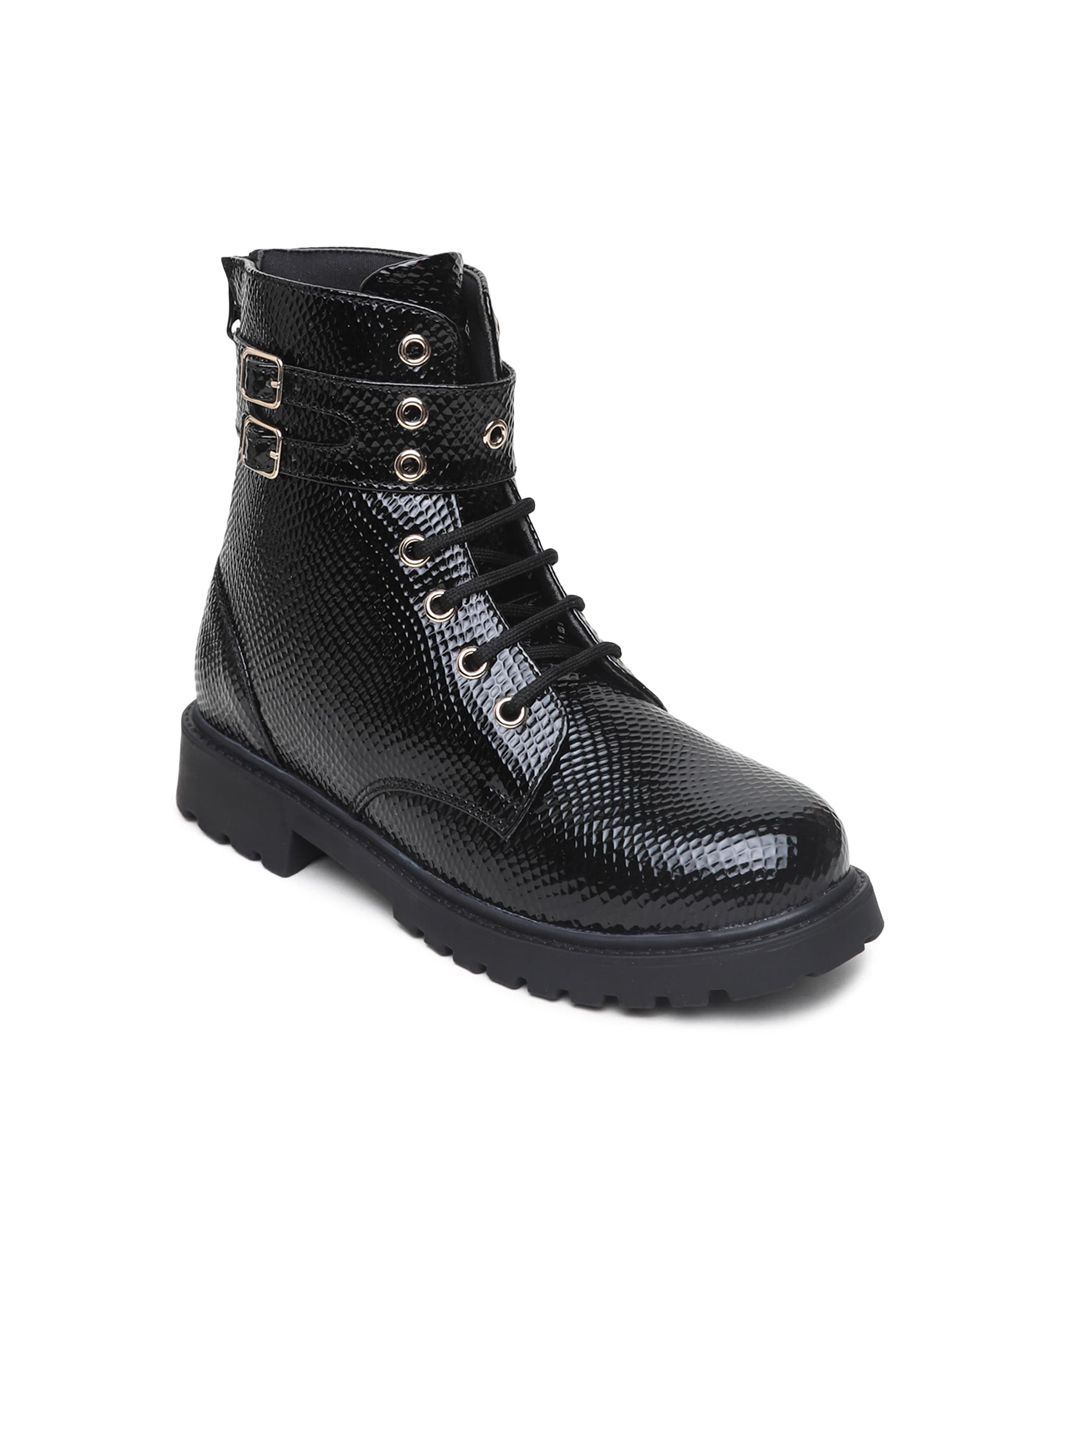 VALIOSAA Black High-Top Block Heeled Boots with Buckles Price in India